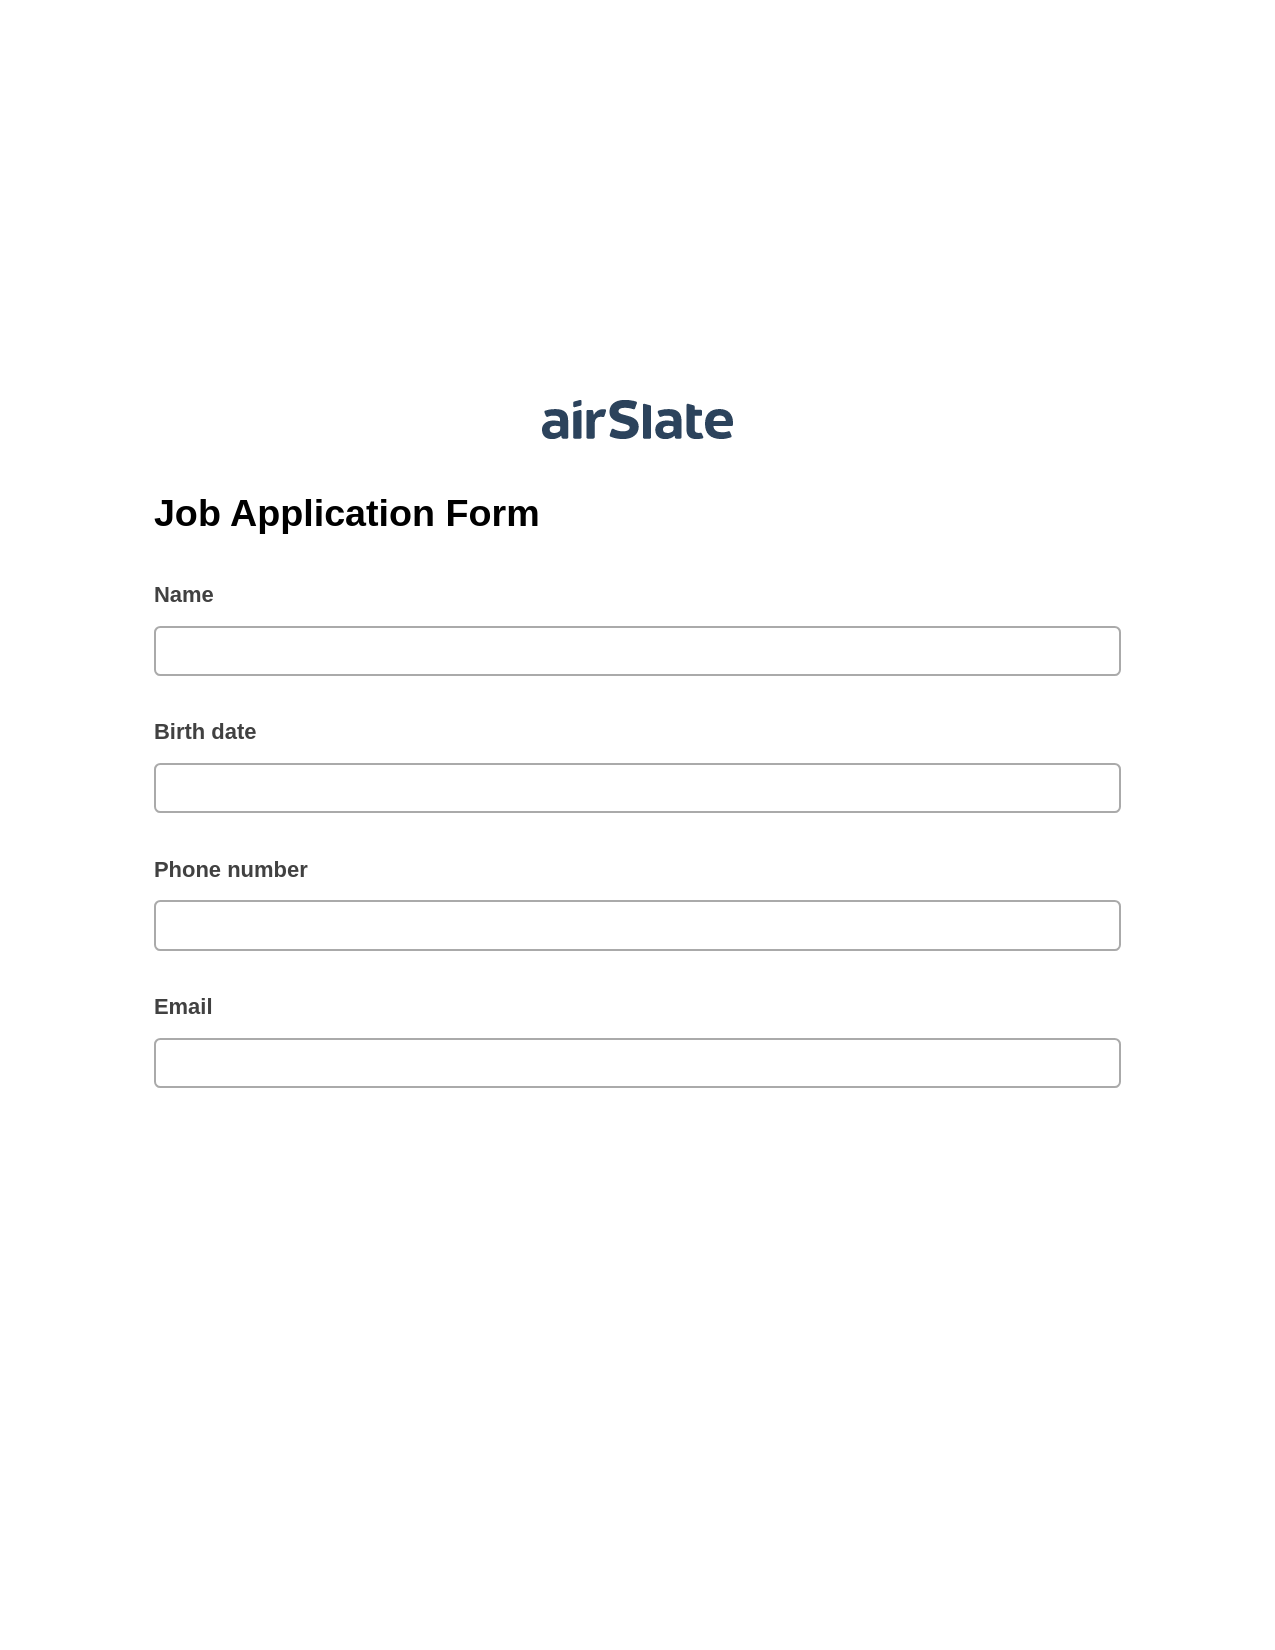 Multirole Job Application Form Pre-fill from CSV File Dropdown Options Bot, Roles Reminder Bot, Export to MySQL Bot